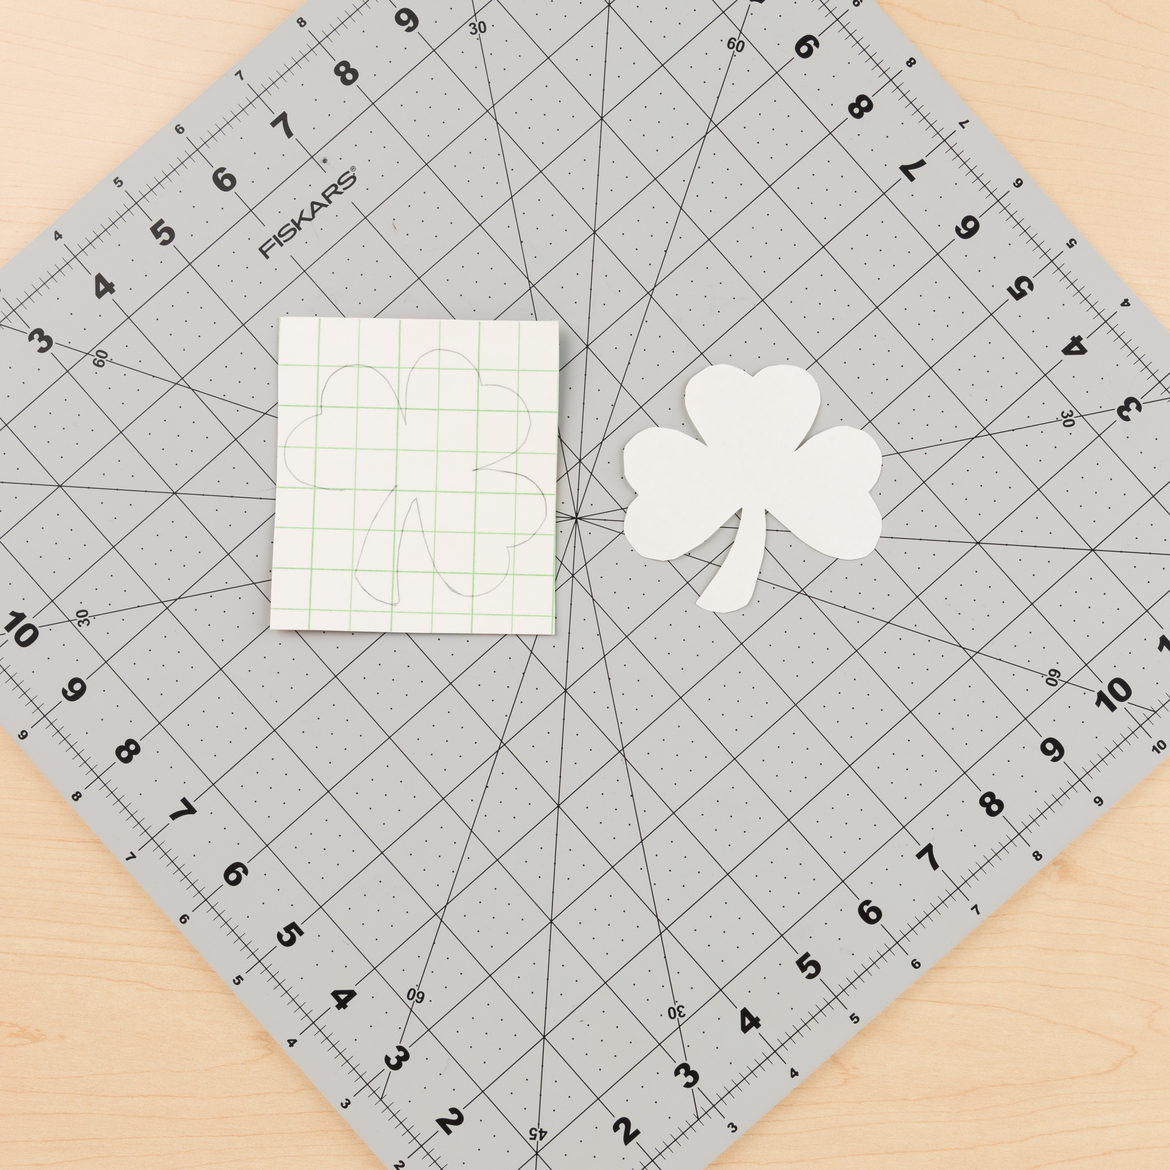 Shamrock template made with construction paper. Shamrock traced onto Duck Tape fabric made in step one